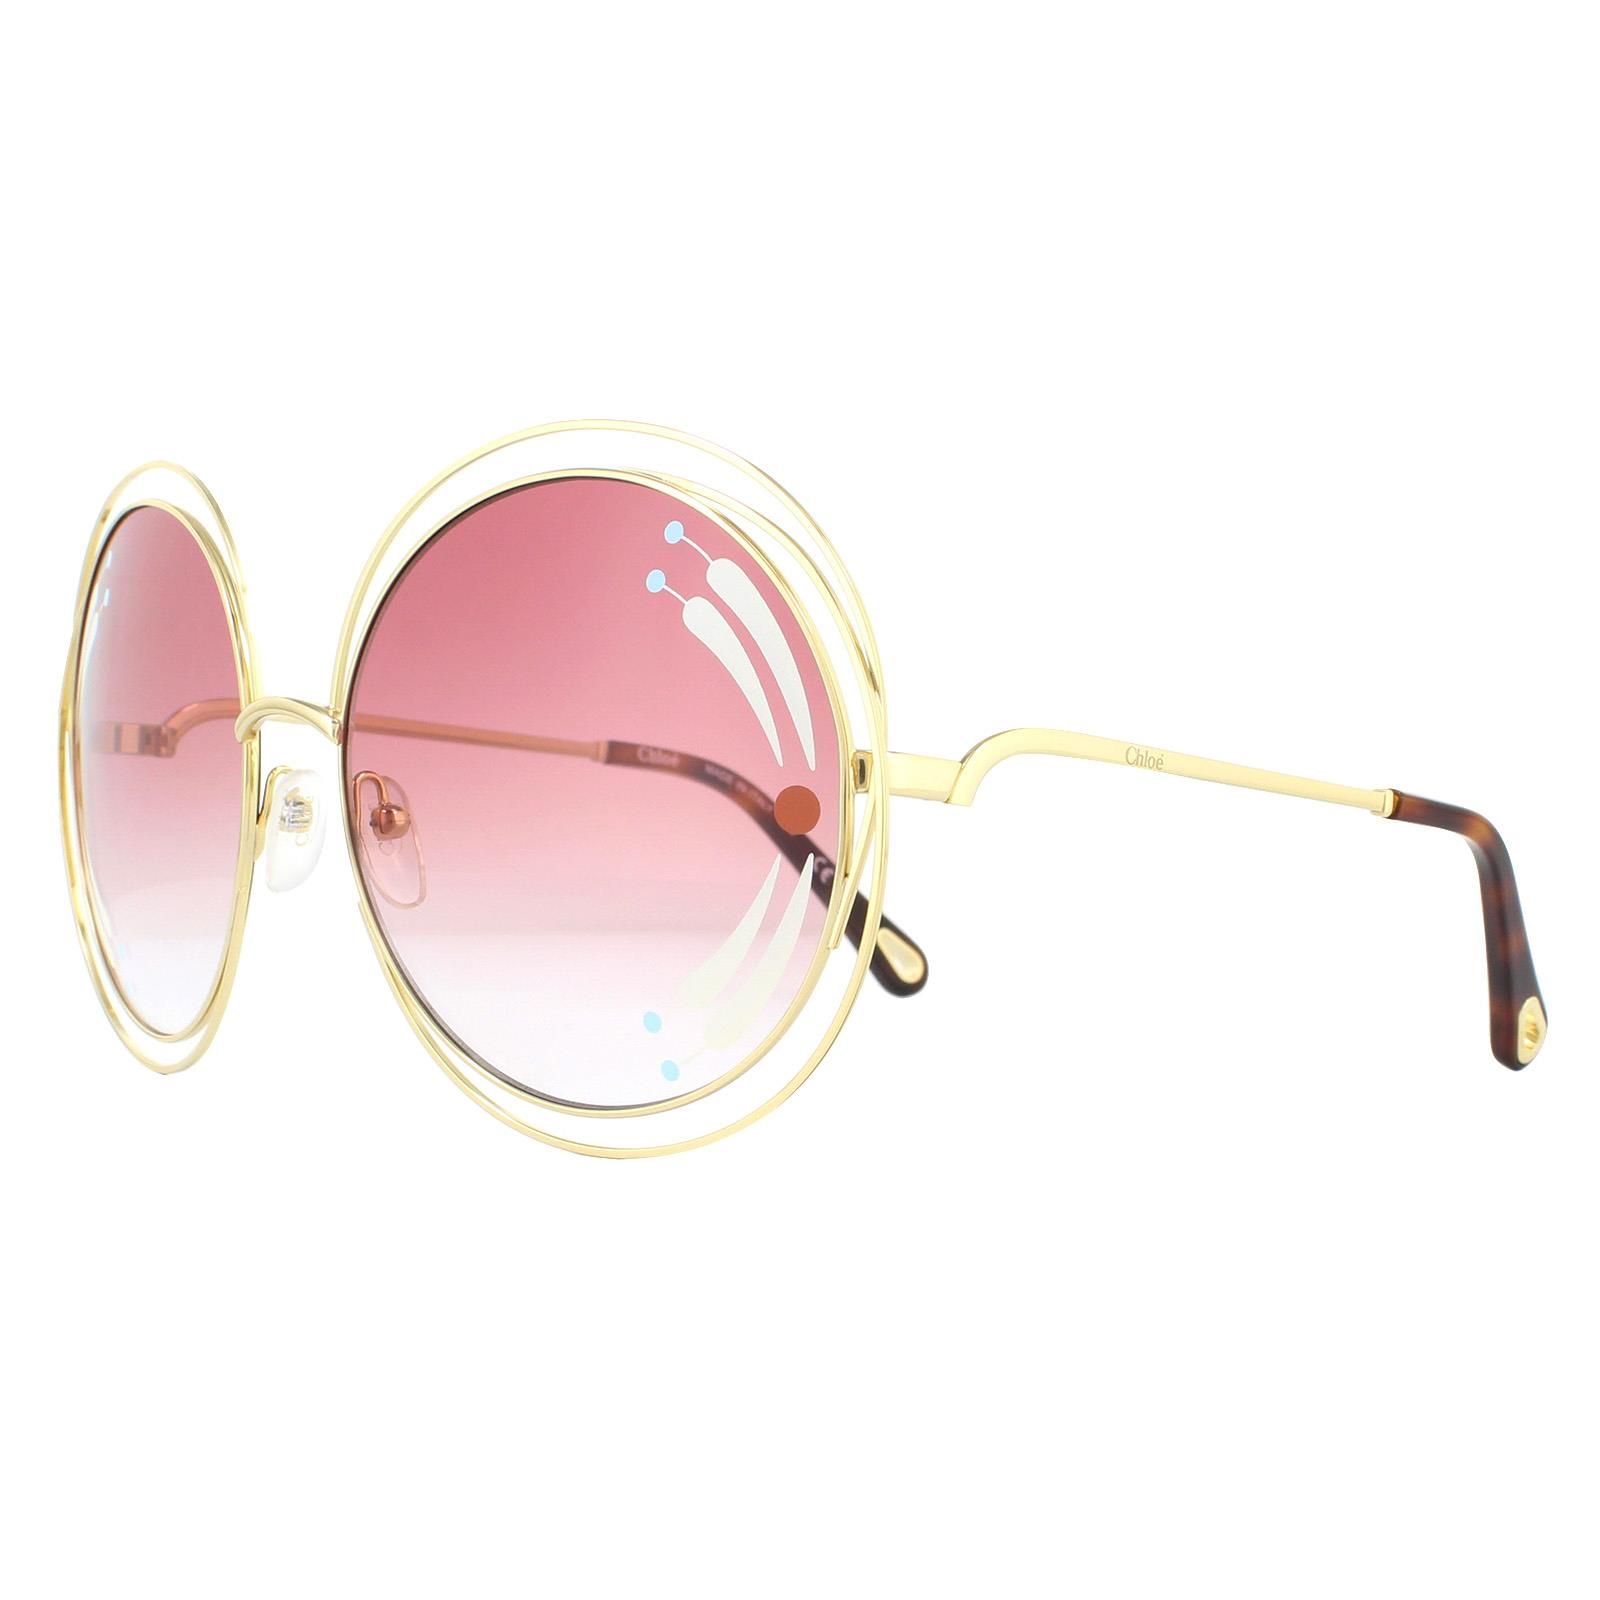 Chloe Sunglasses Carlina CE114SRI 835 Gold Havana Burgundy Gradient are an oversized round style with a sculptural wired frame, embellished lenses and temples etched with the Chloe logo.